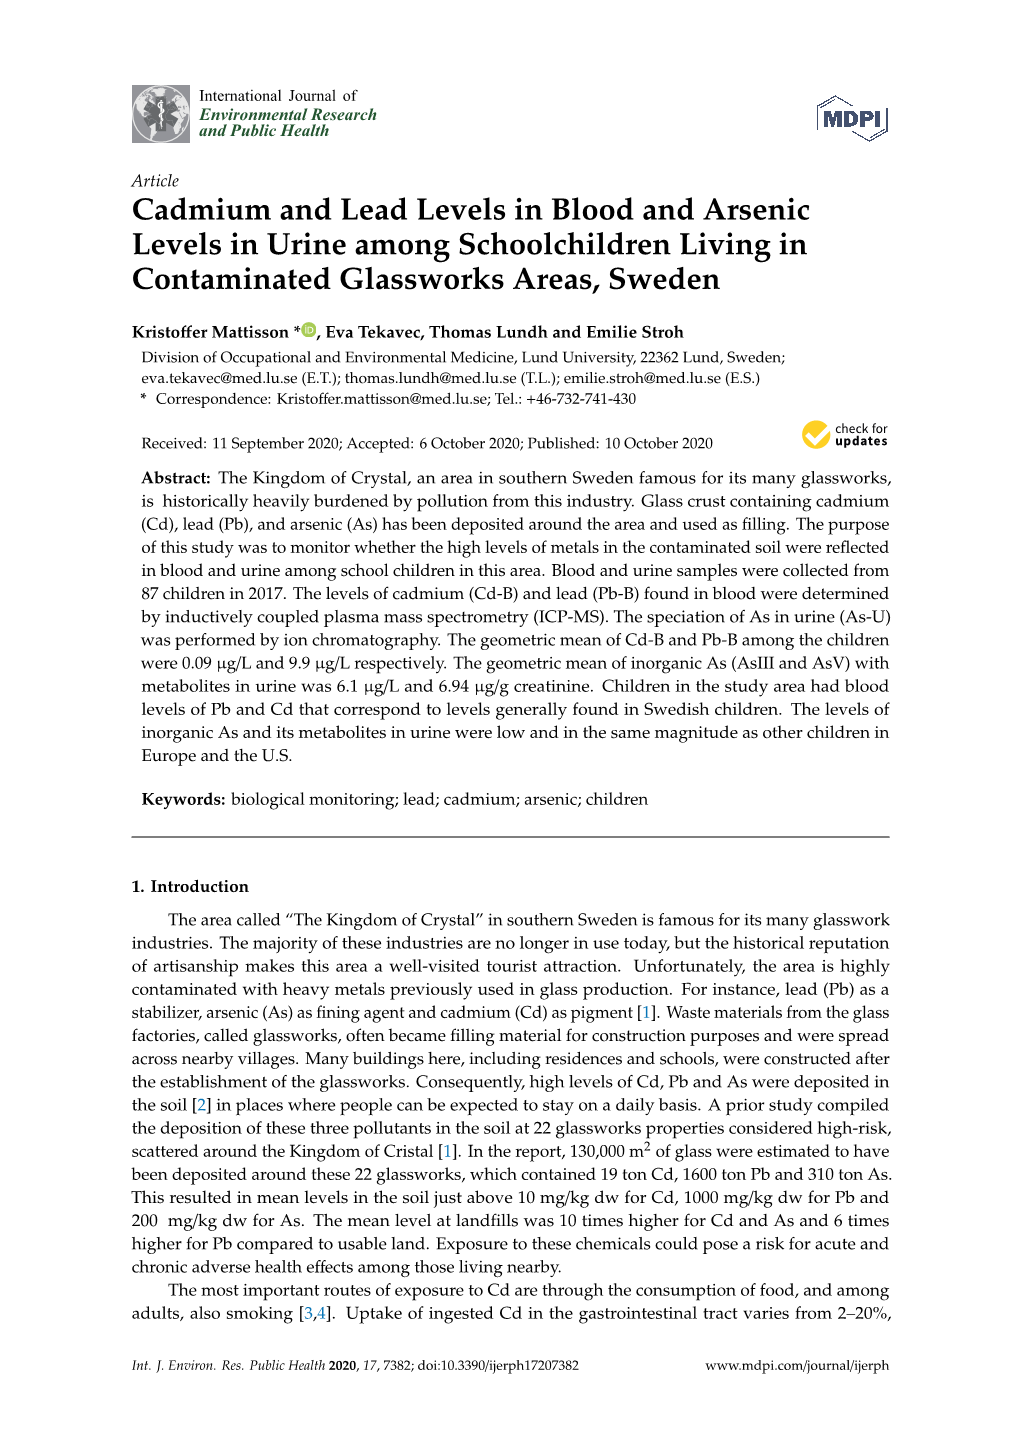 Cadmium and Lead Levels in Blood and Arsenic Levels in Urine Among Schoolchildren Living in Contaminated Glassworks Areas, Sweden